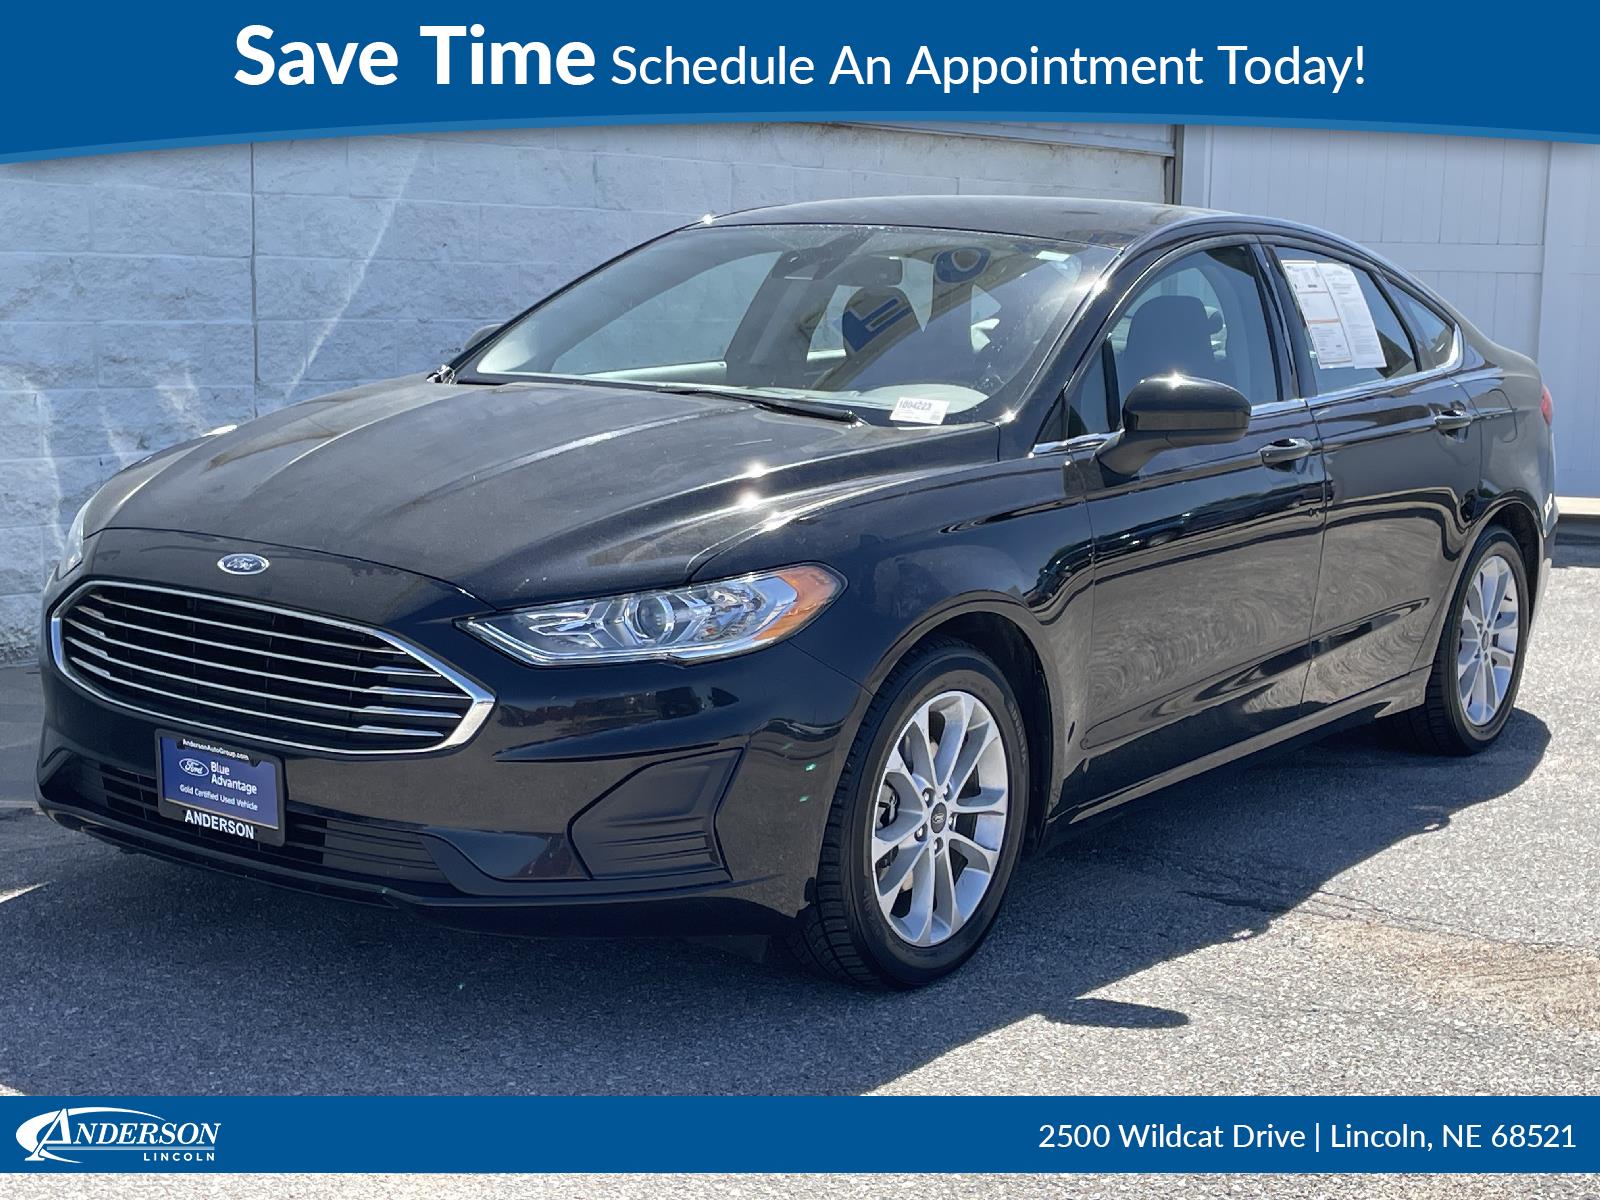 Used 2020 Ford Fusion SE Stock: 1004223